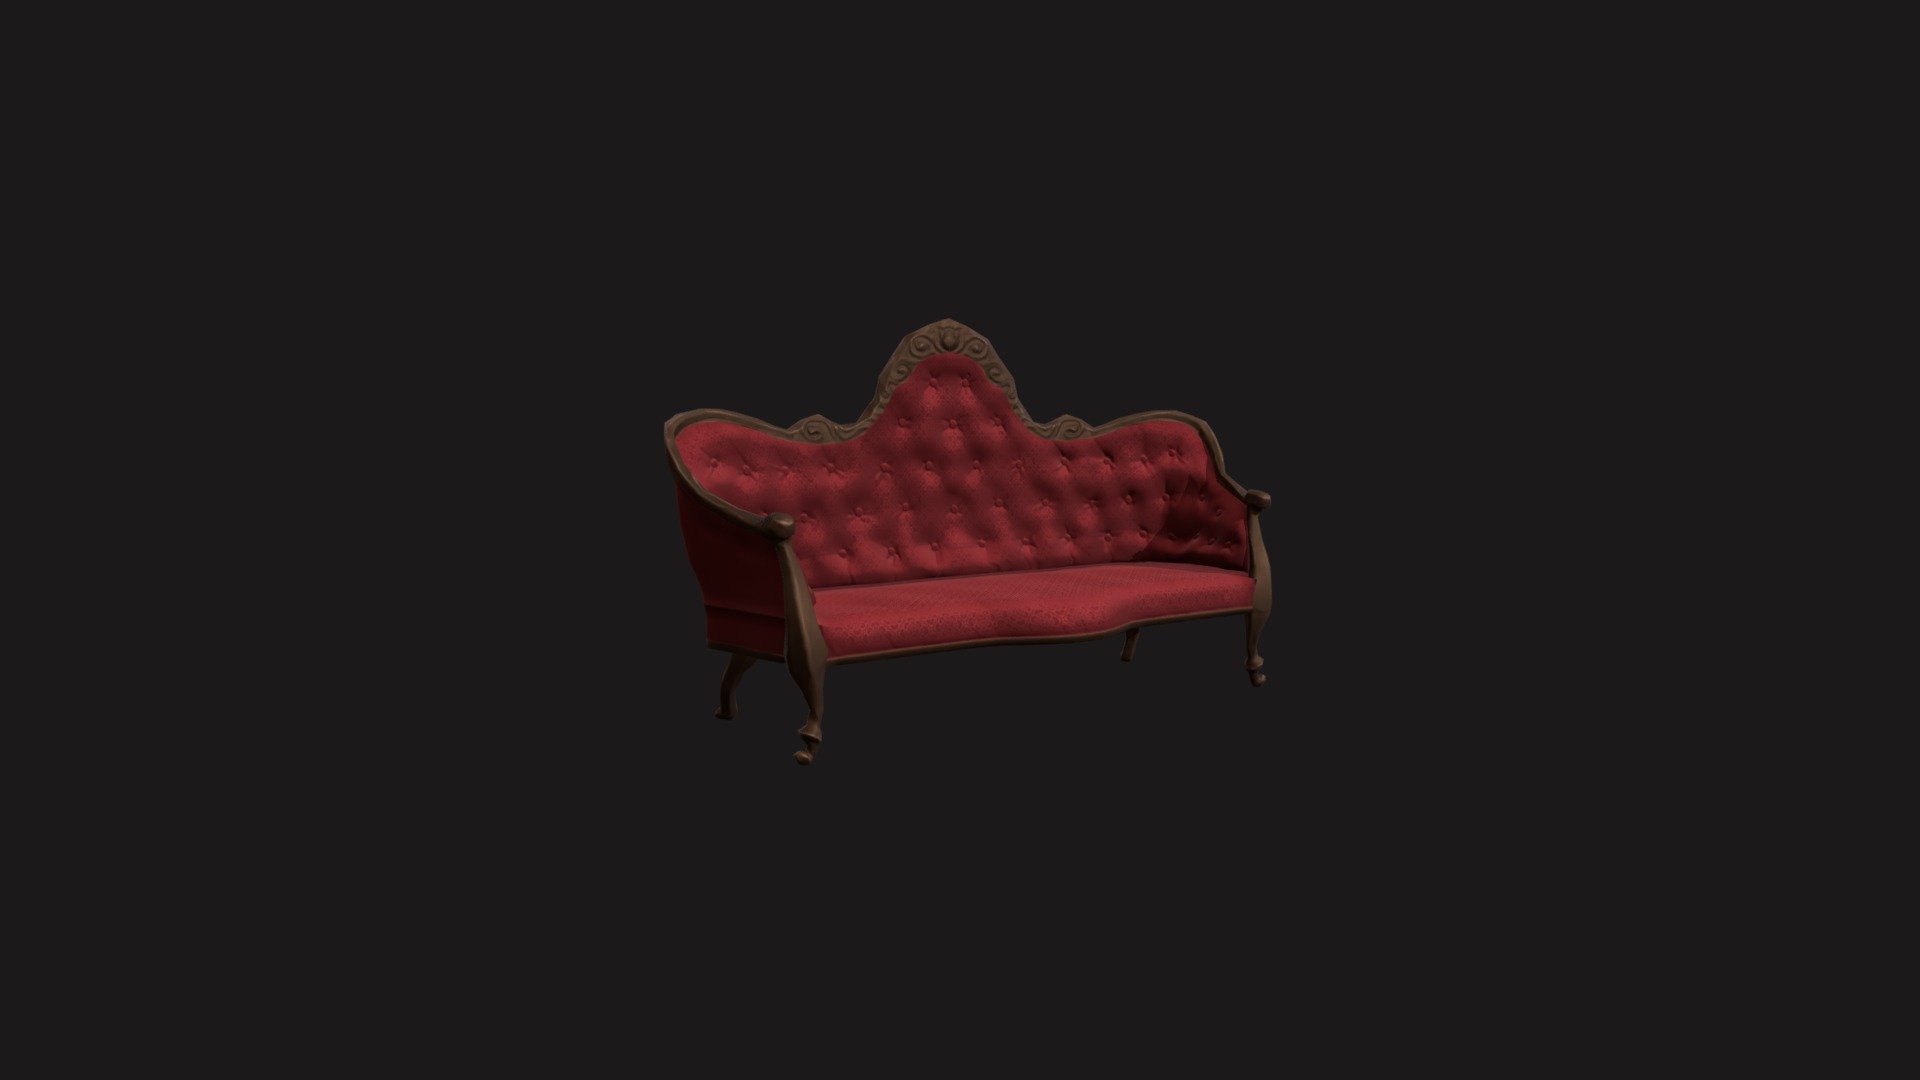 A stylized Victorian-era Couch I made. I modeled the low-poly on blender and sculpted details in Zbrush. Textured in Substance Painter 3d model